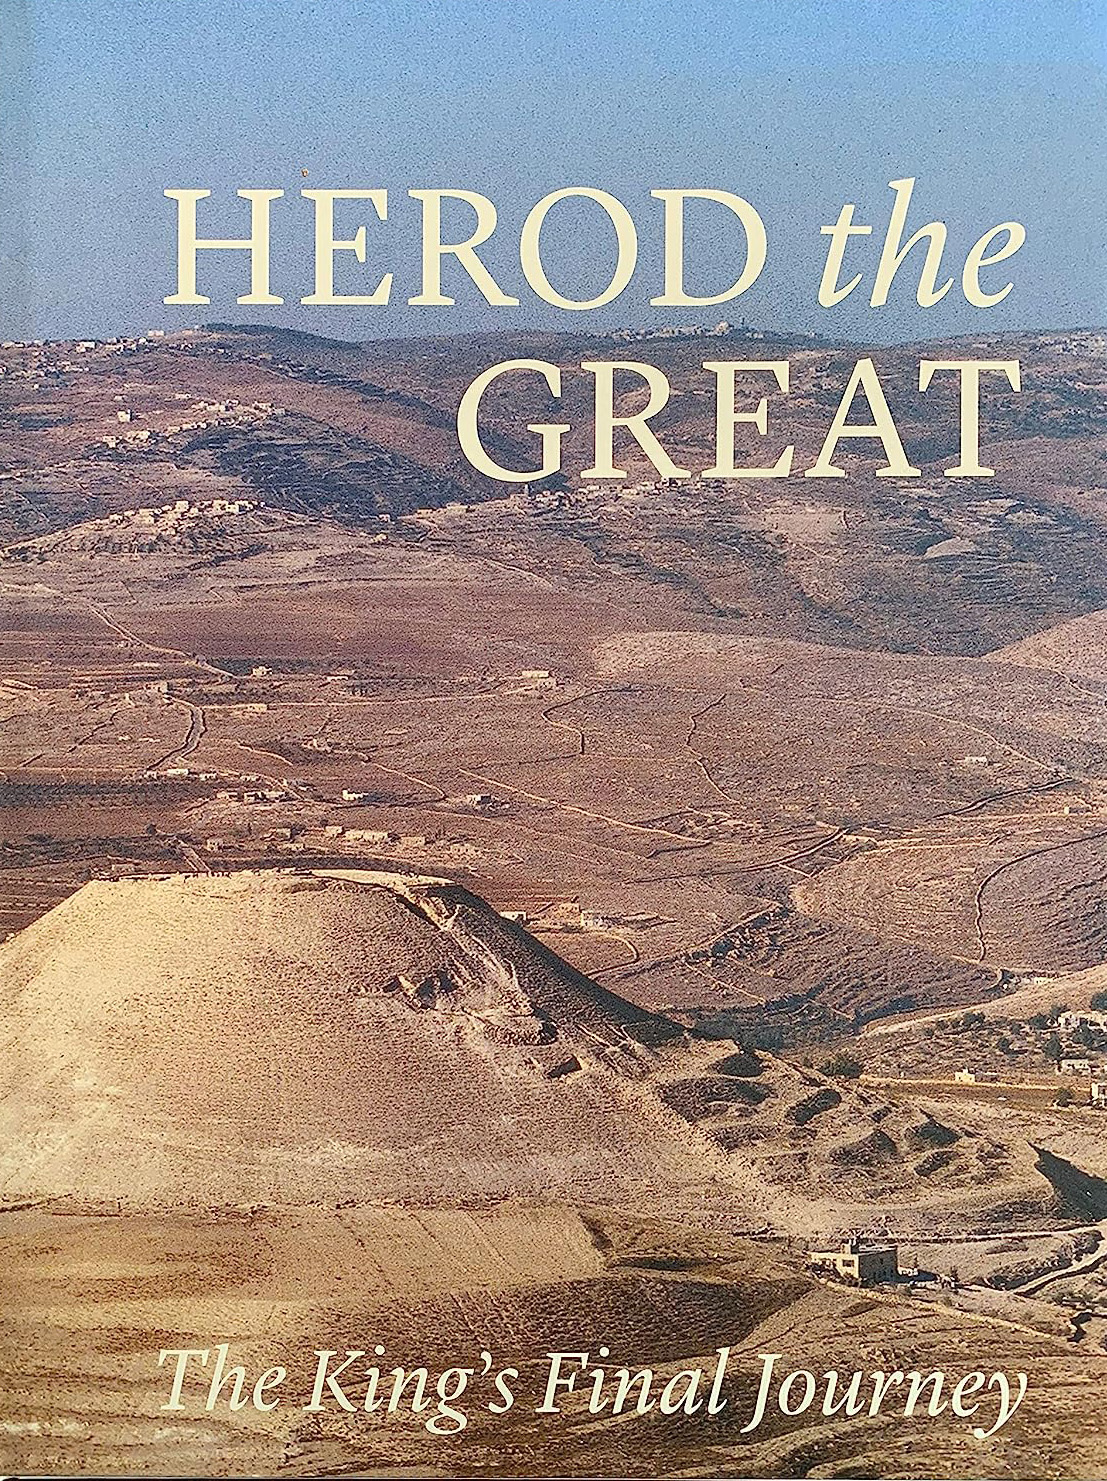 Herod the Great: The King’s Final Journey